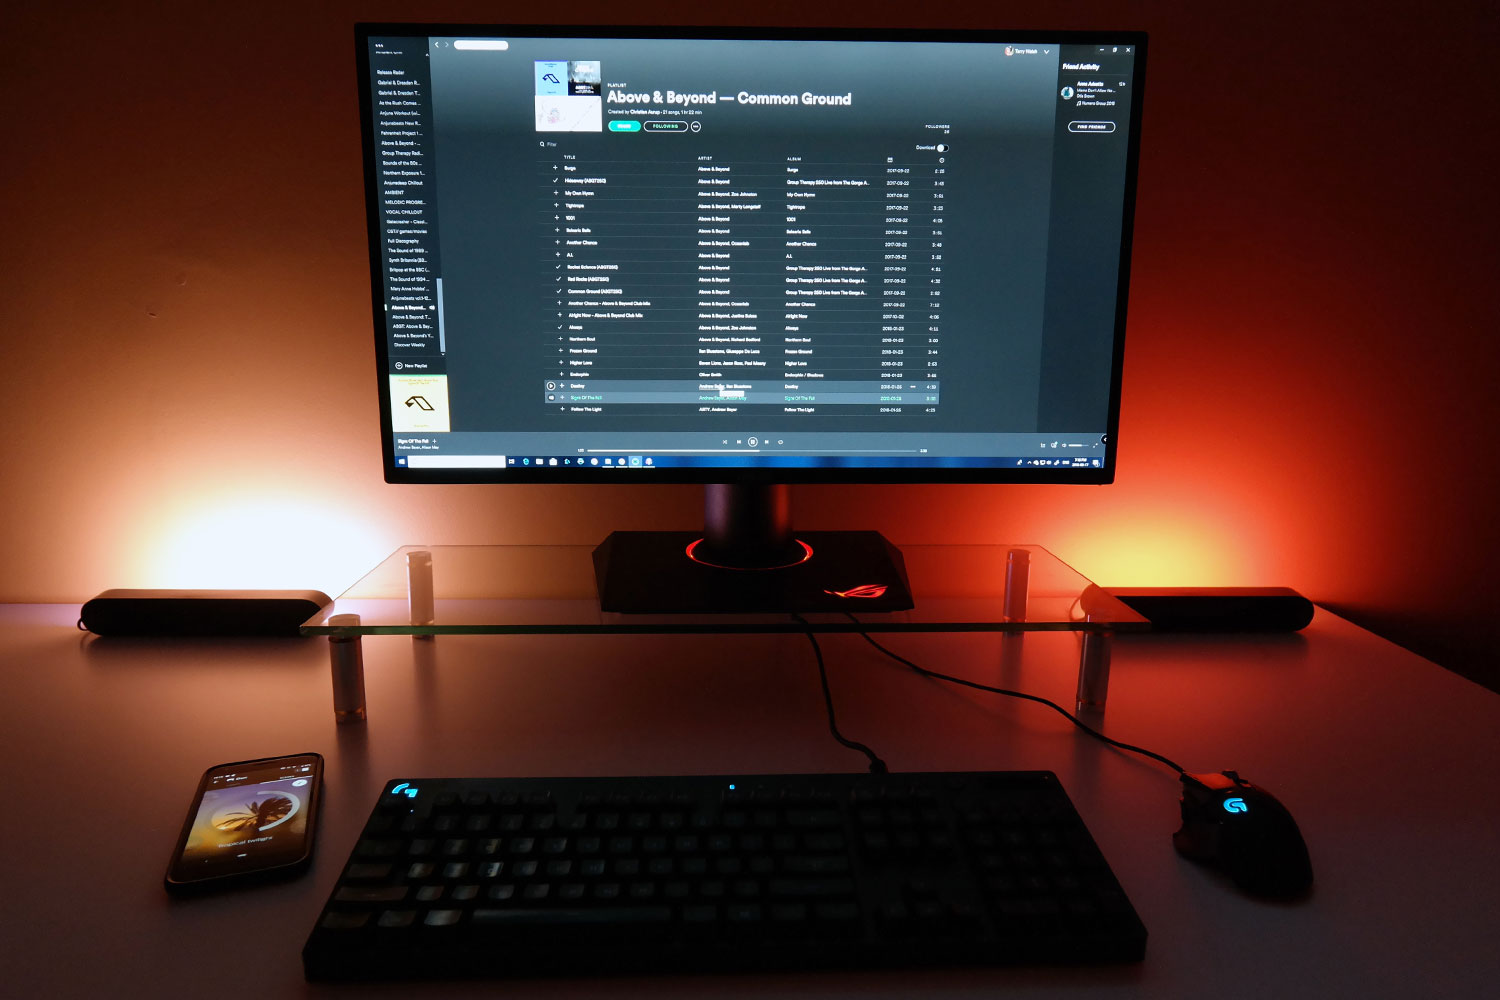 Philips Hue Play Light Bar Review